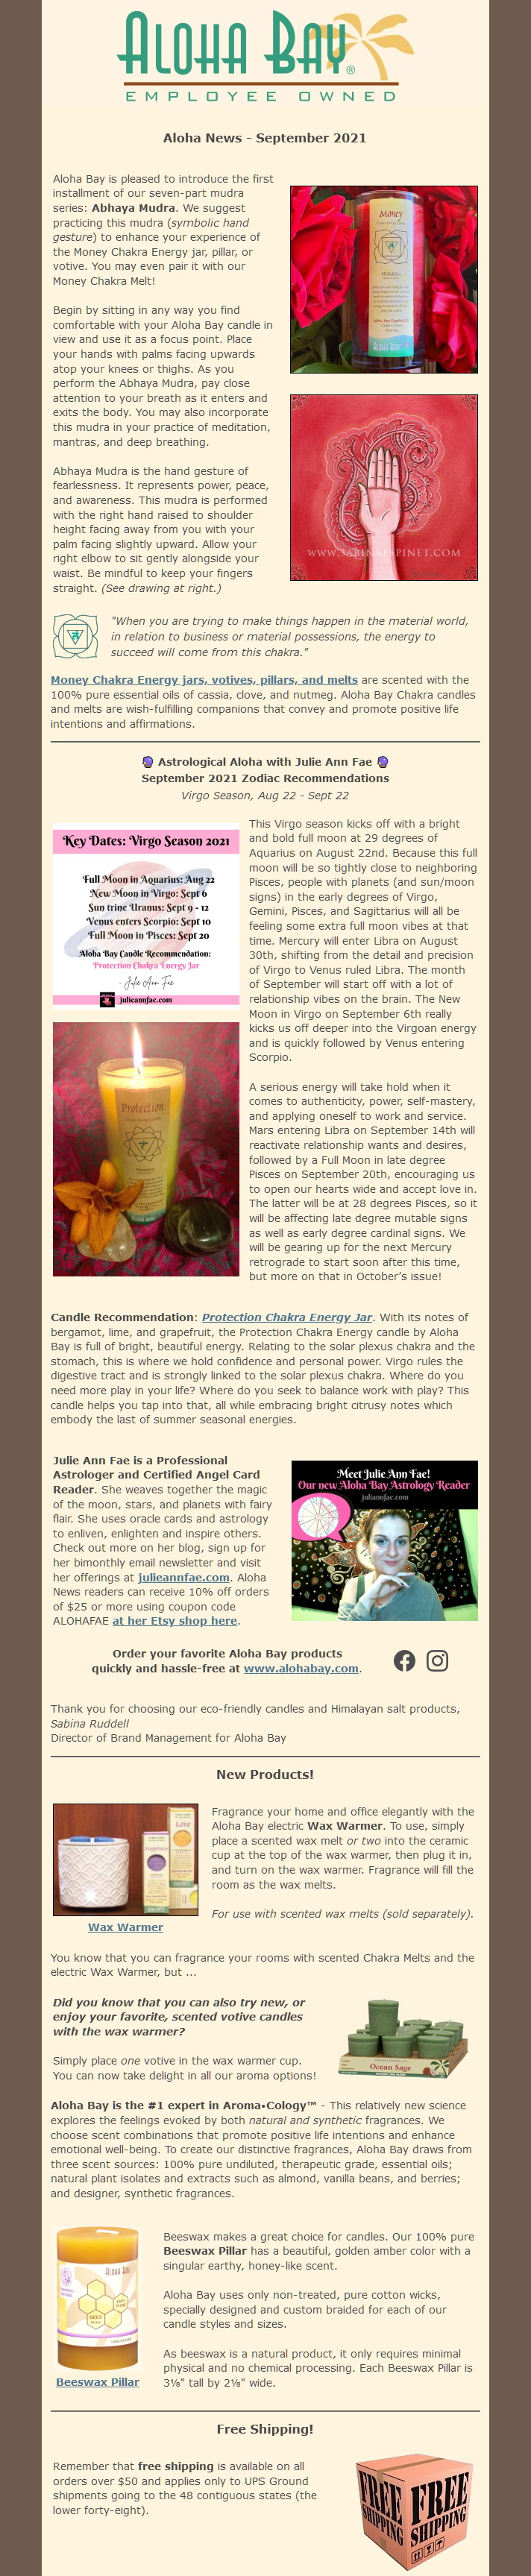 screen capture of our emailed newsletter